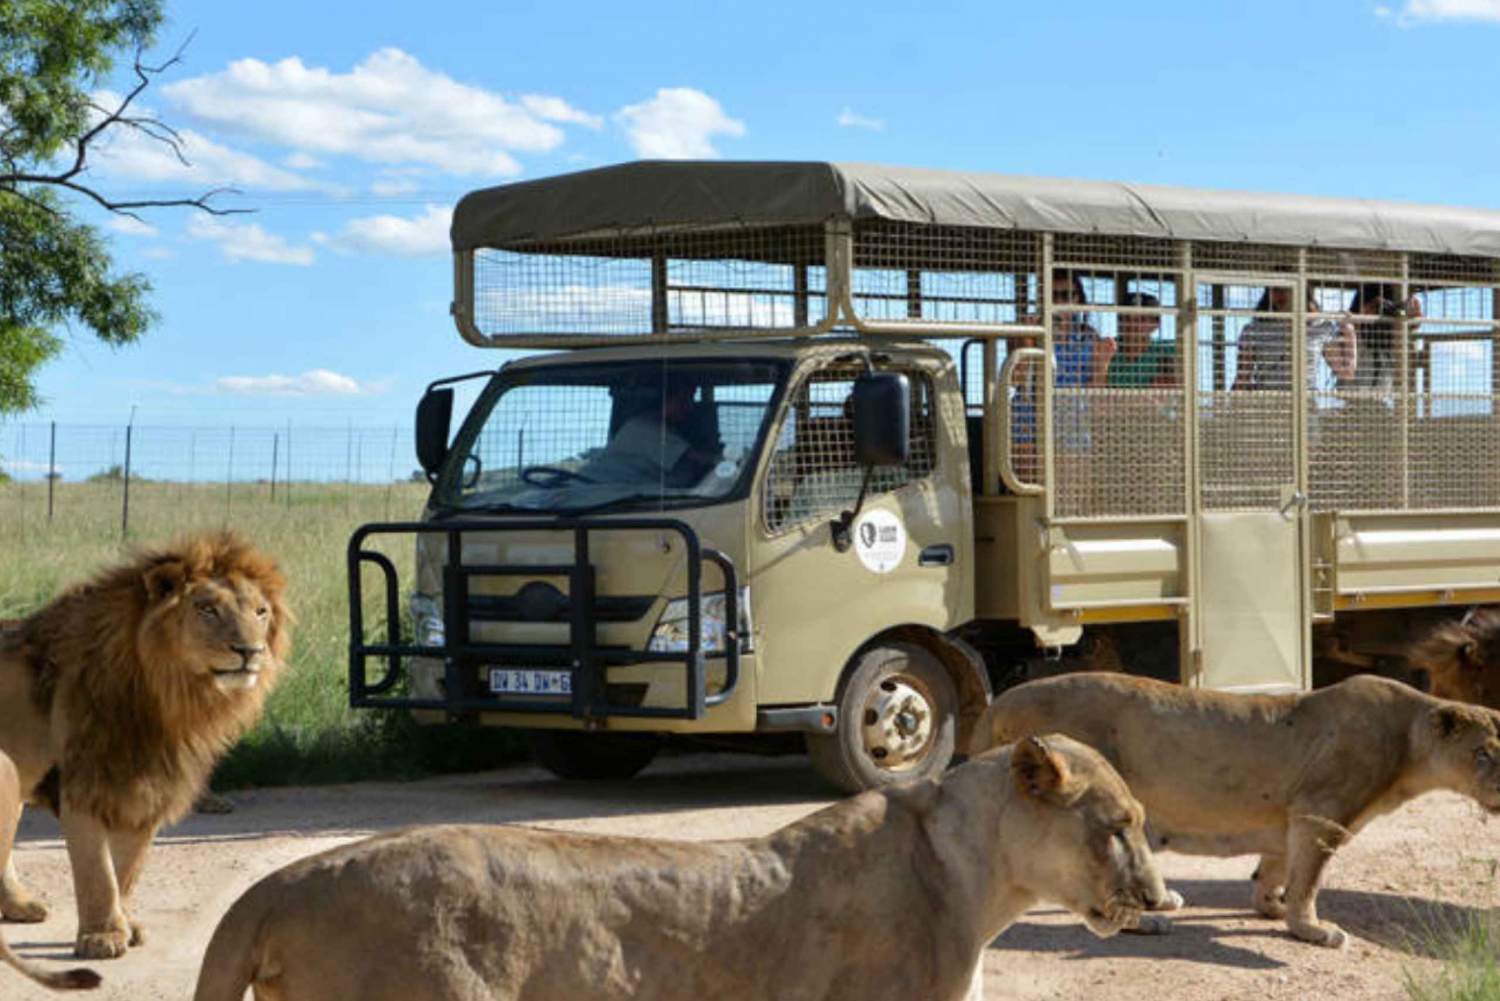 Lion & Safari Park: An Adventure in the Heart of Nature